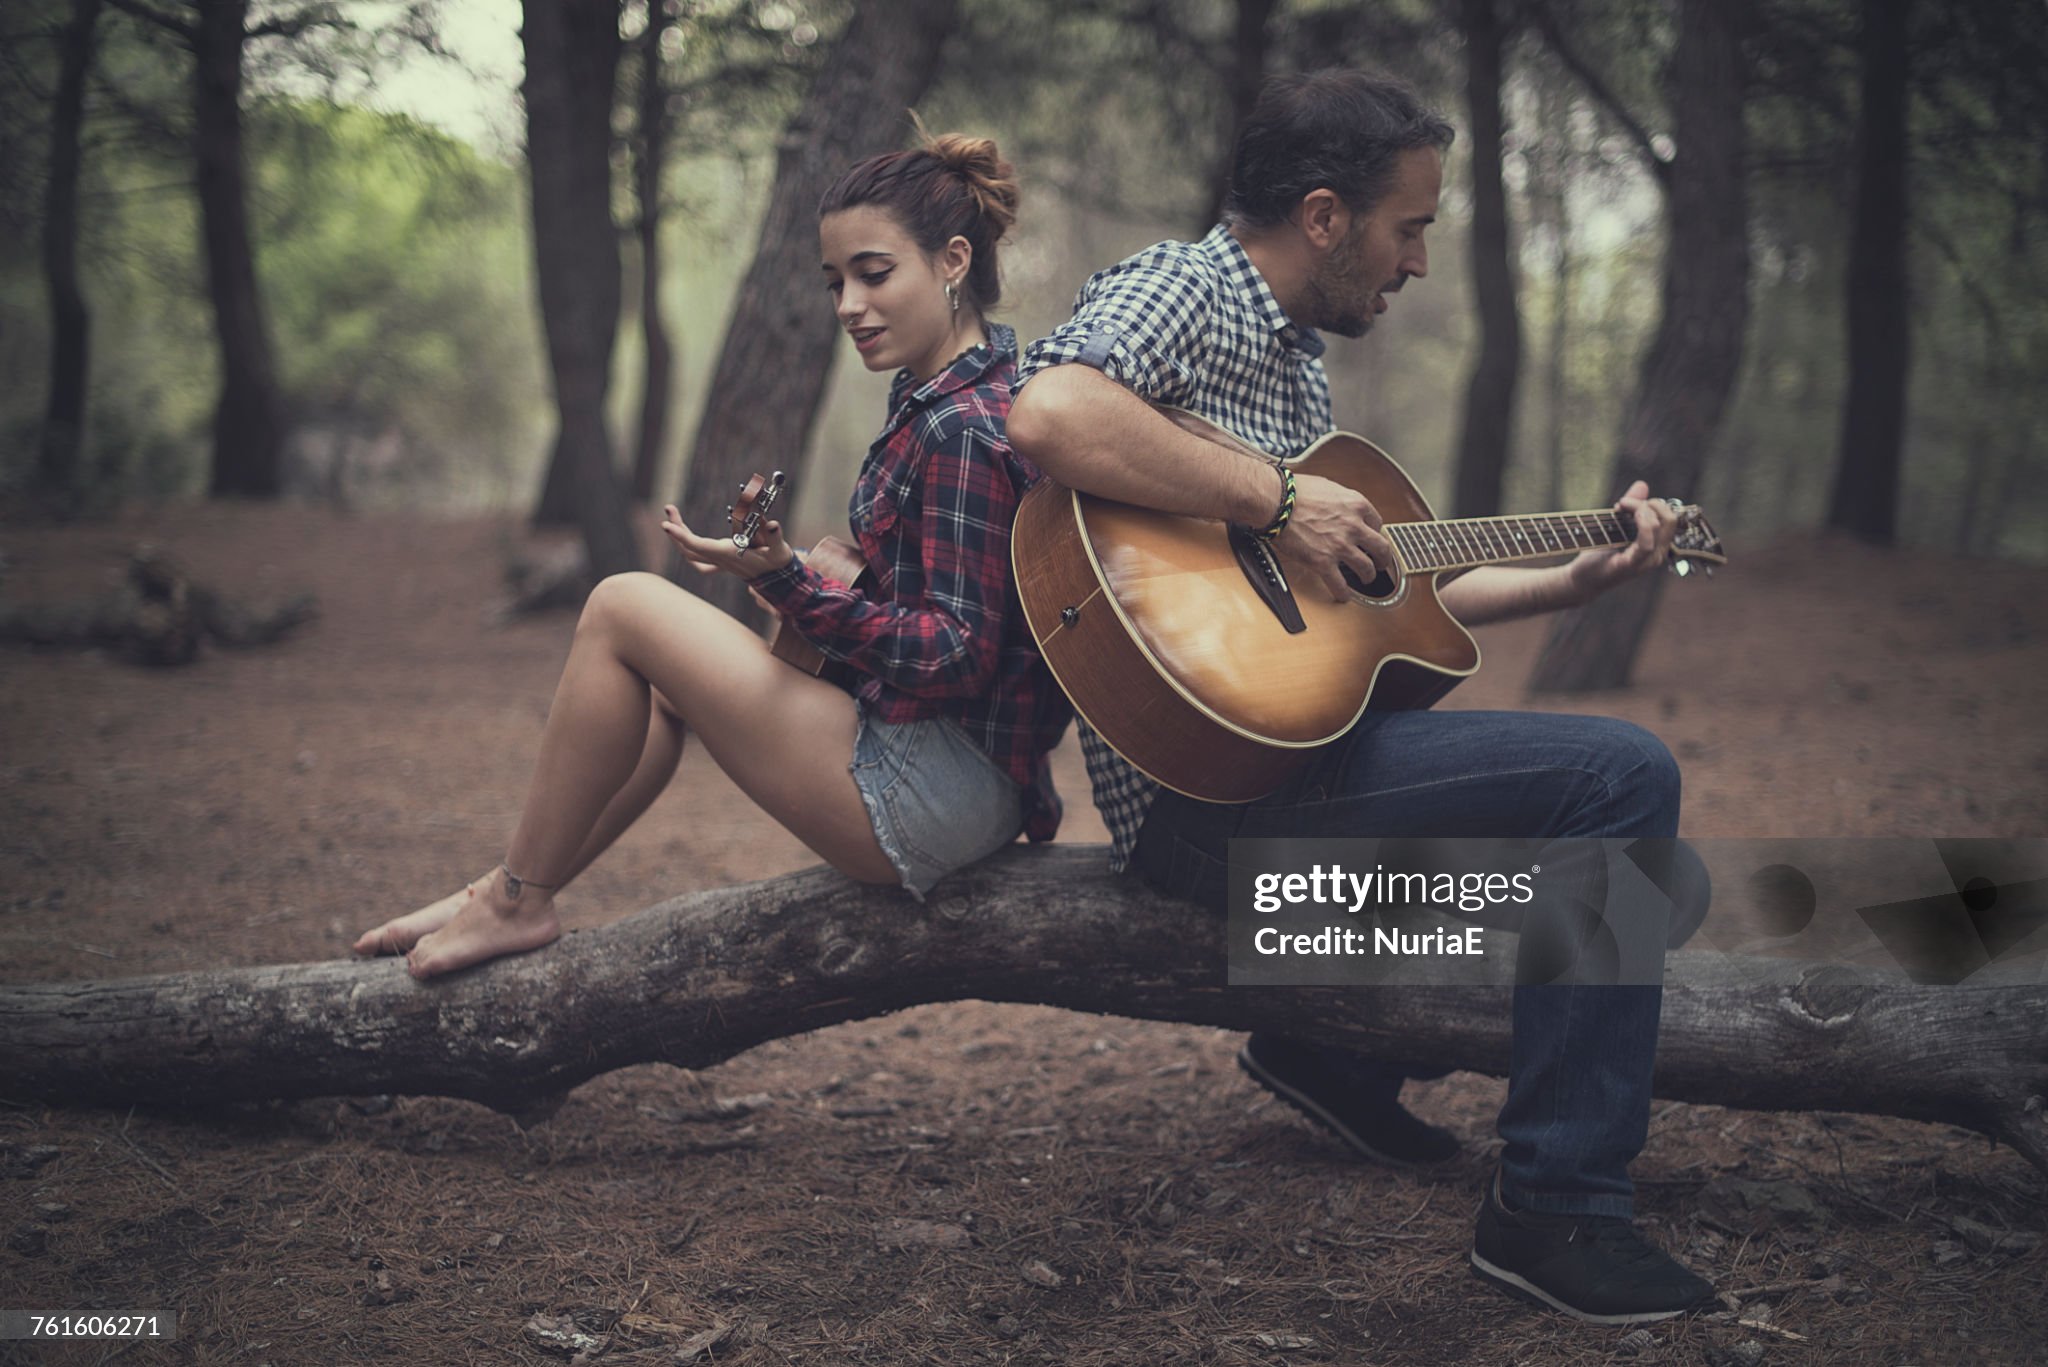 https://media.gettyimages.com/id/761606271/photo/man-and-girl-sitting-in-forest-playing-the-guitar-and-ukulele-spain.jpg?s=2048x2048&amp;w=gi&amp;k=20&amp;c=vyySjiP8_jY0w14sg1_vfv8aS6SvY9KDXt_677Yugpo=